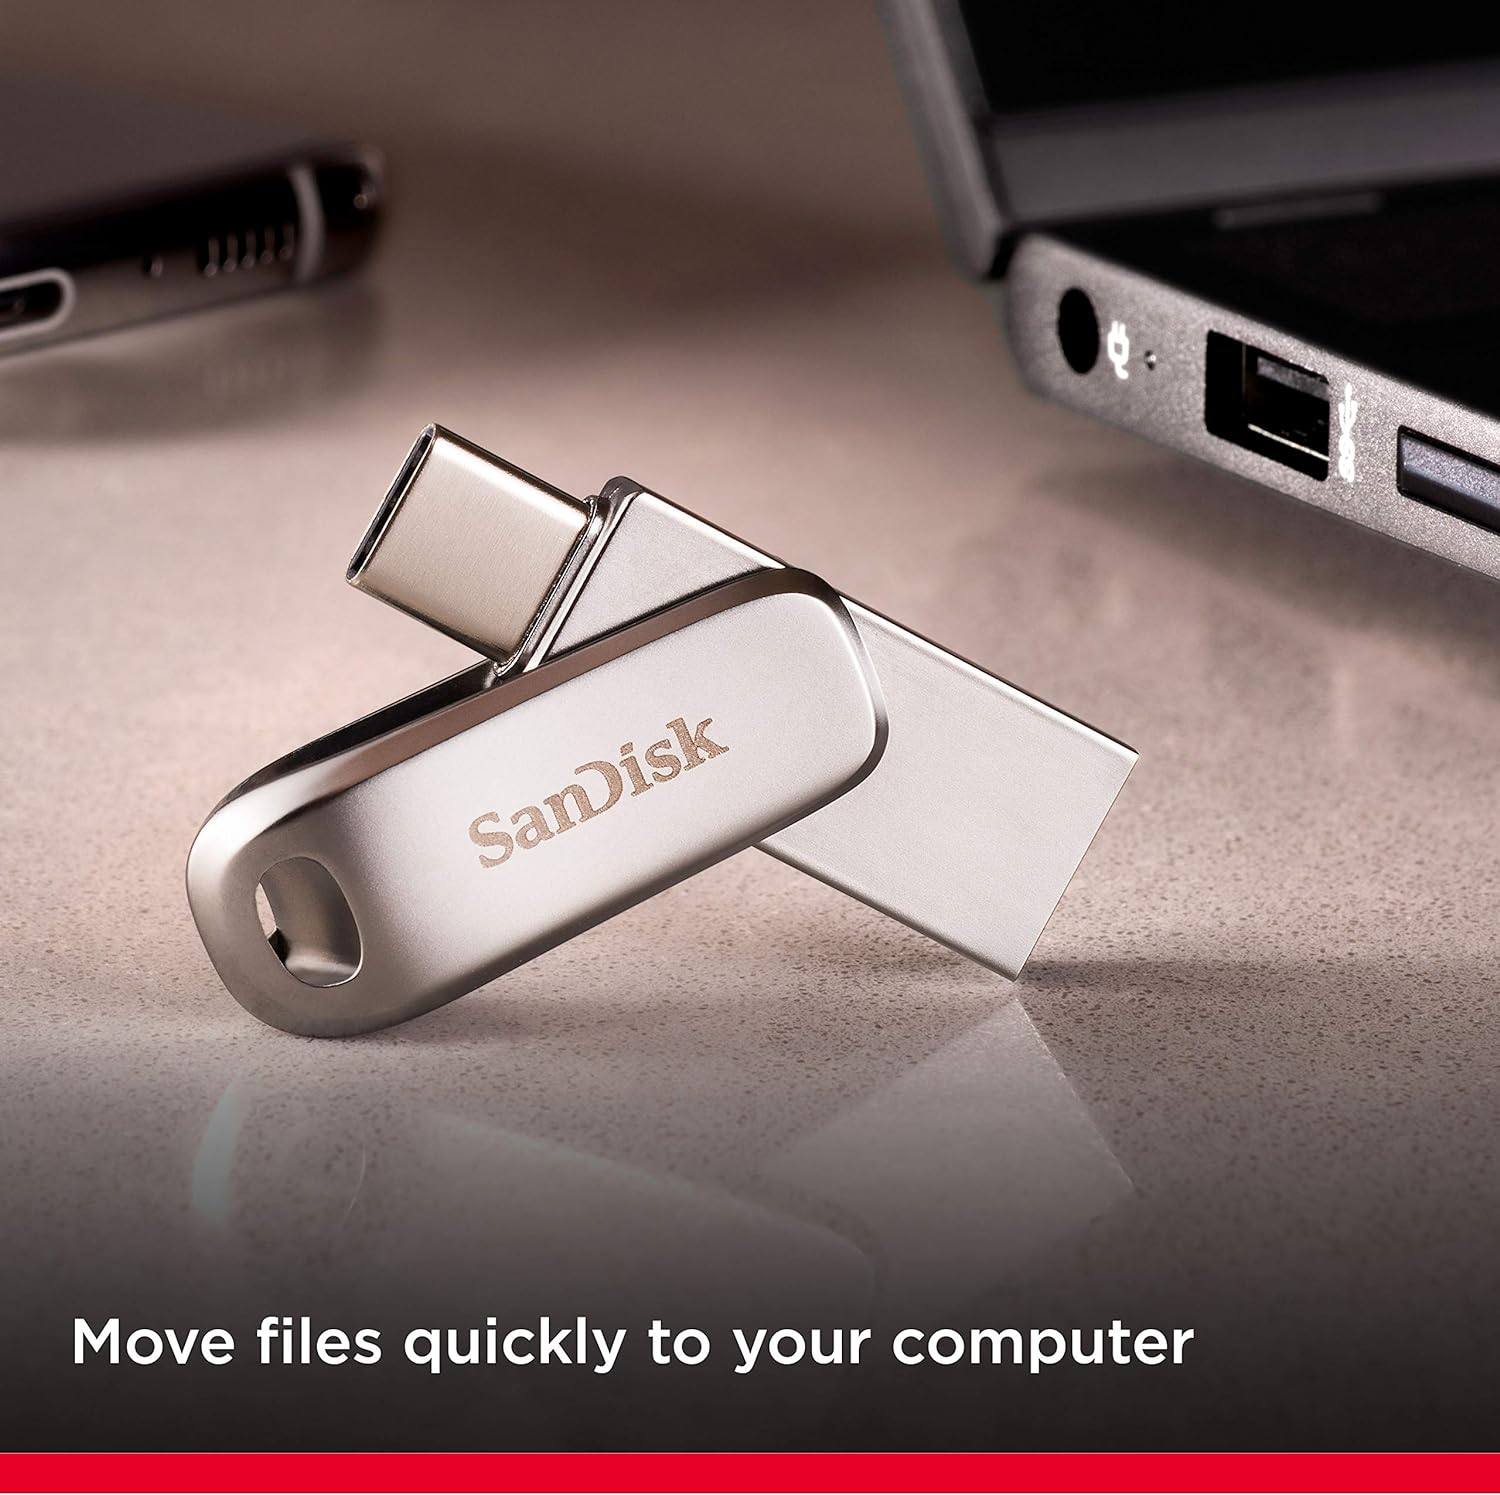 SanDisk 32GB Ultra Dual Drive Luxe USB Type-C - SDDDC4-032G-G46, Silver